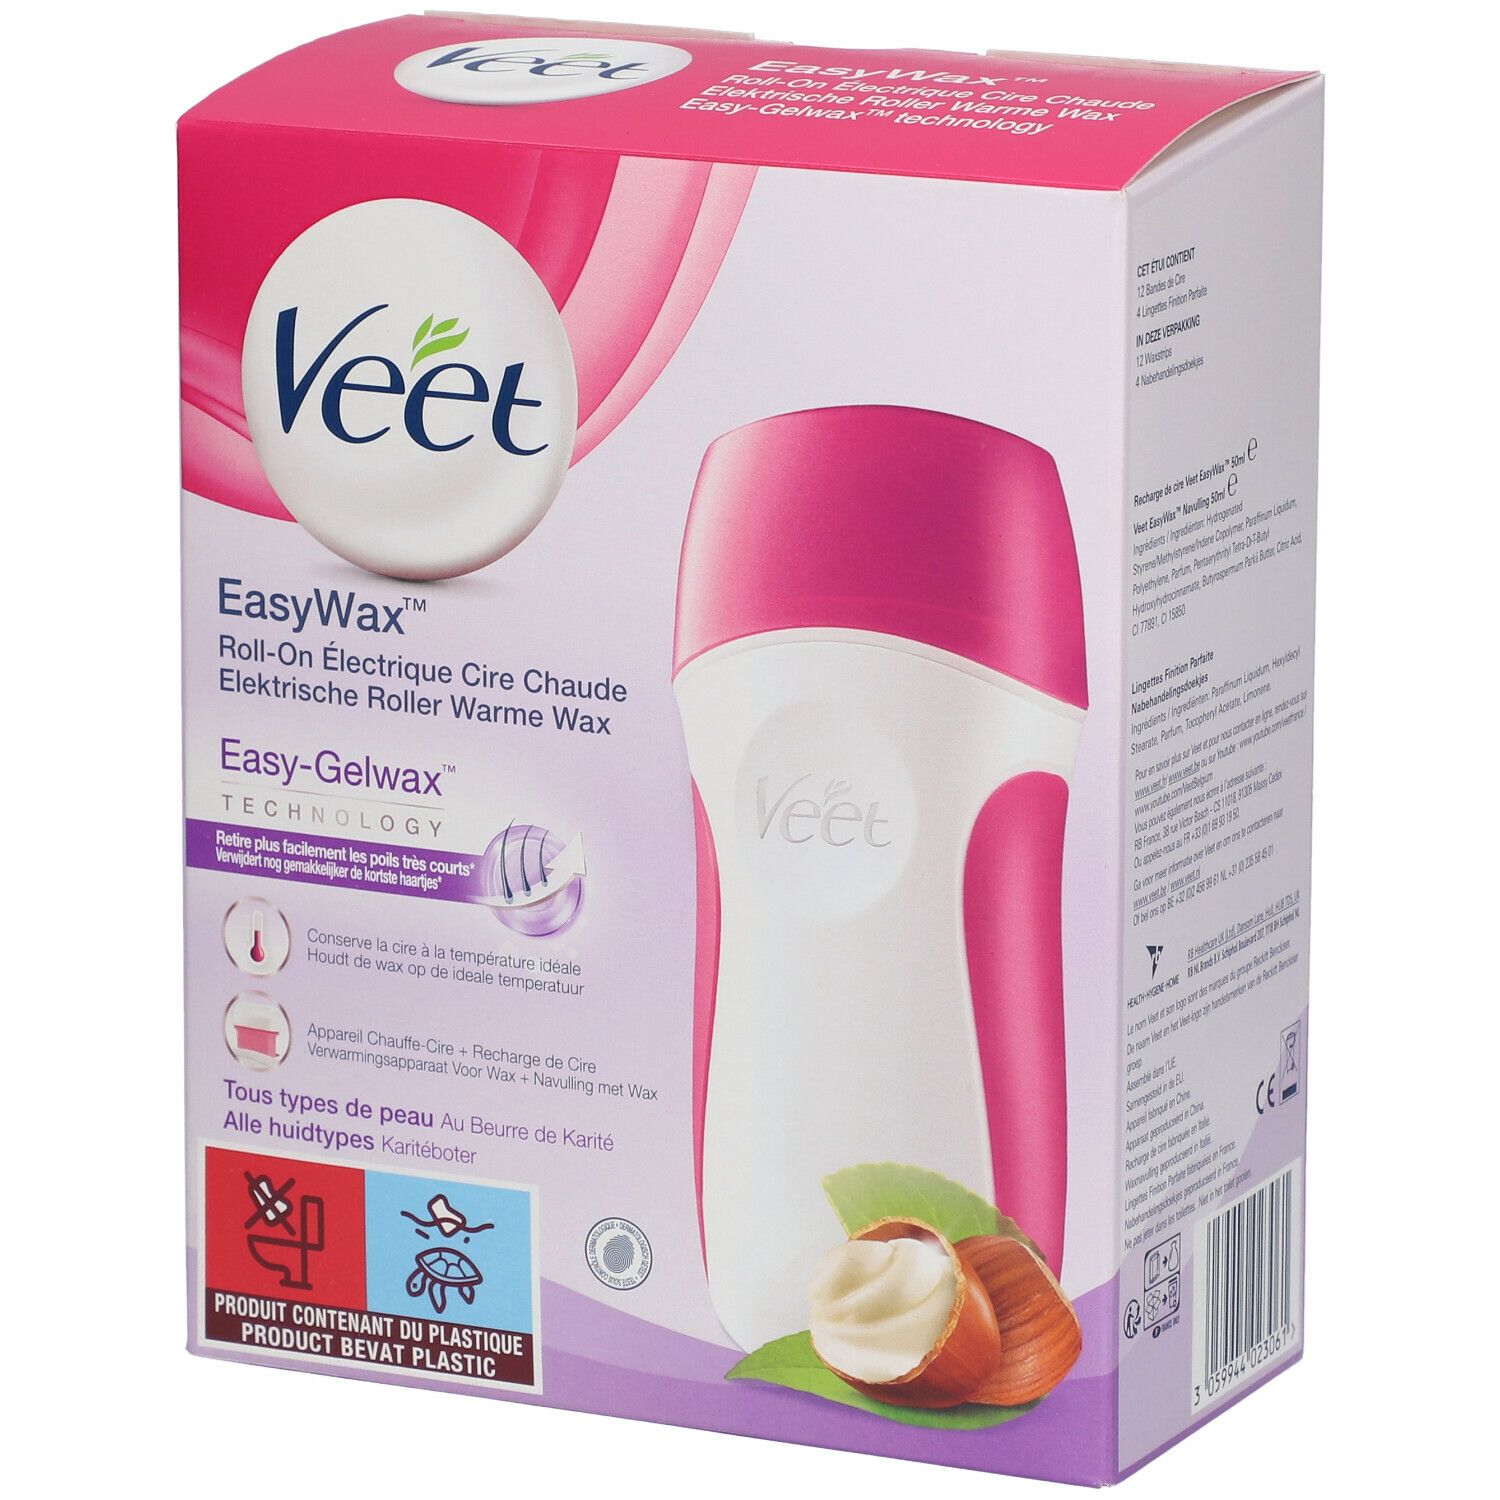 Veet Roll-On Electrique EasyWax™ Cire Chaude